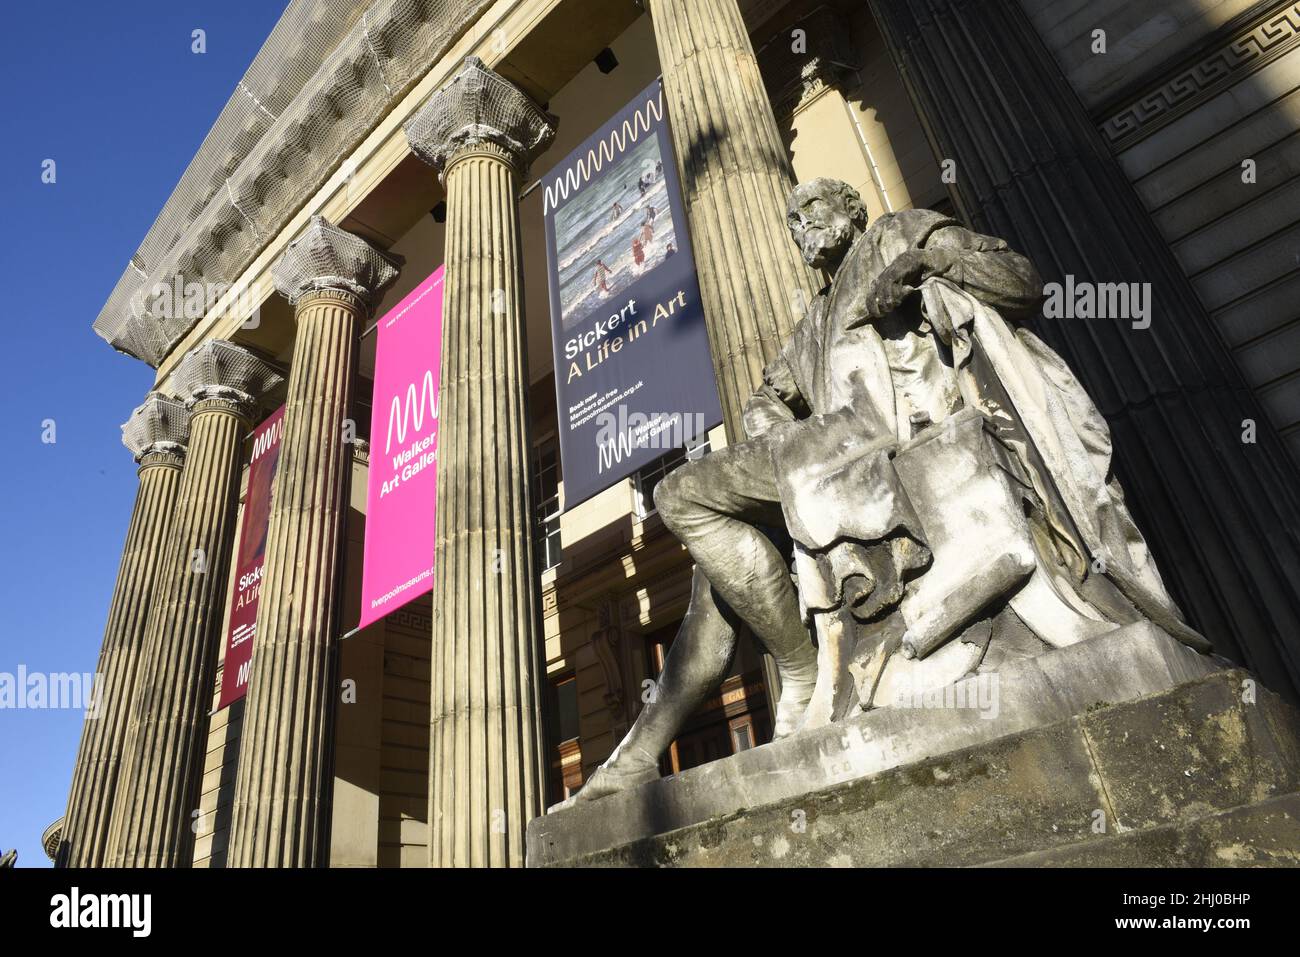 Walker Art Gallery, Liverpool, England, UK. With large exhibition banners hanging down on façade Stock Photo